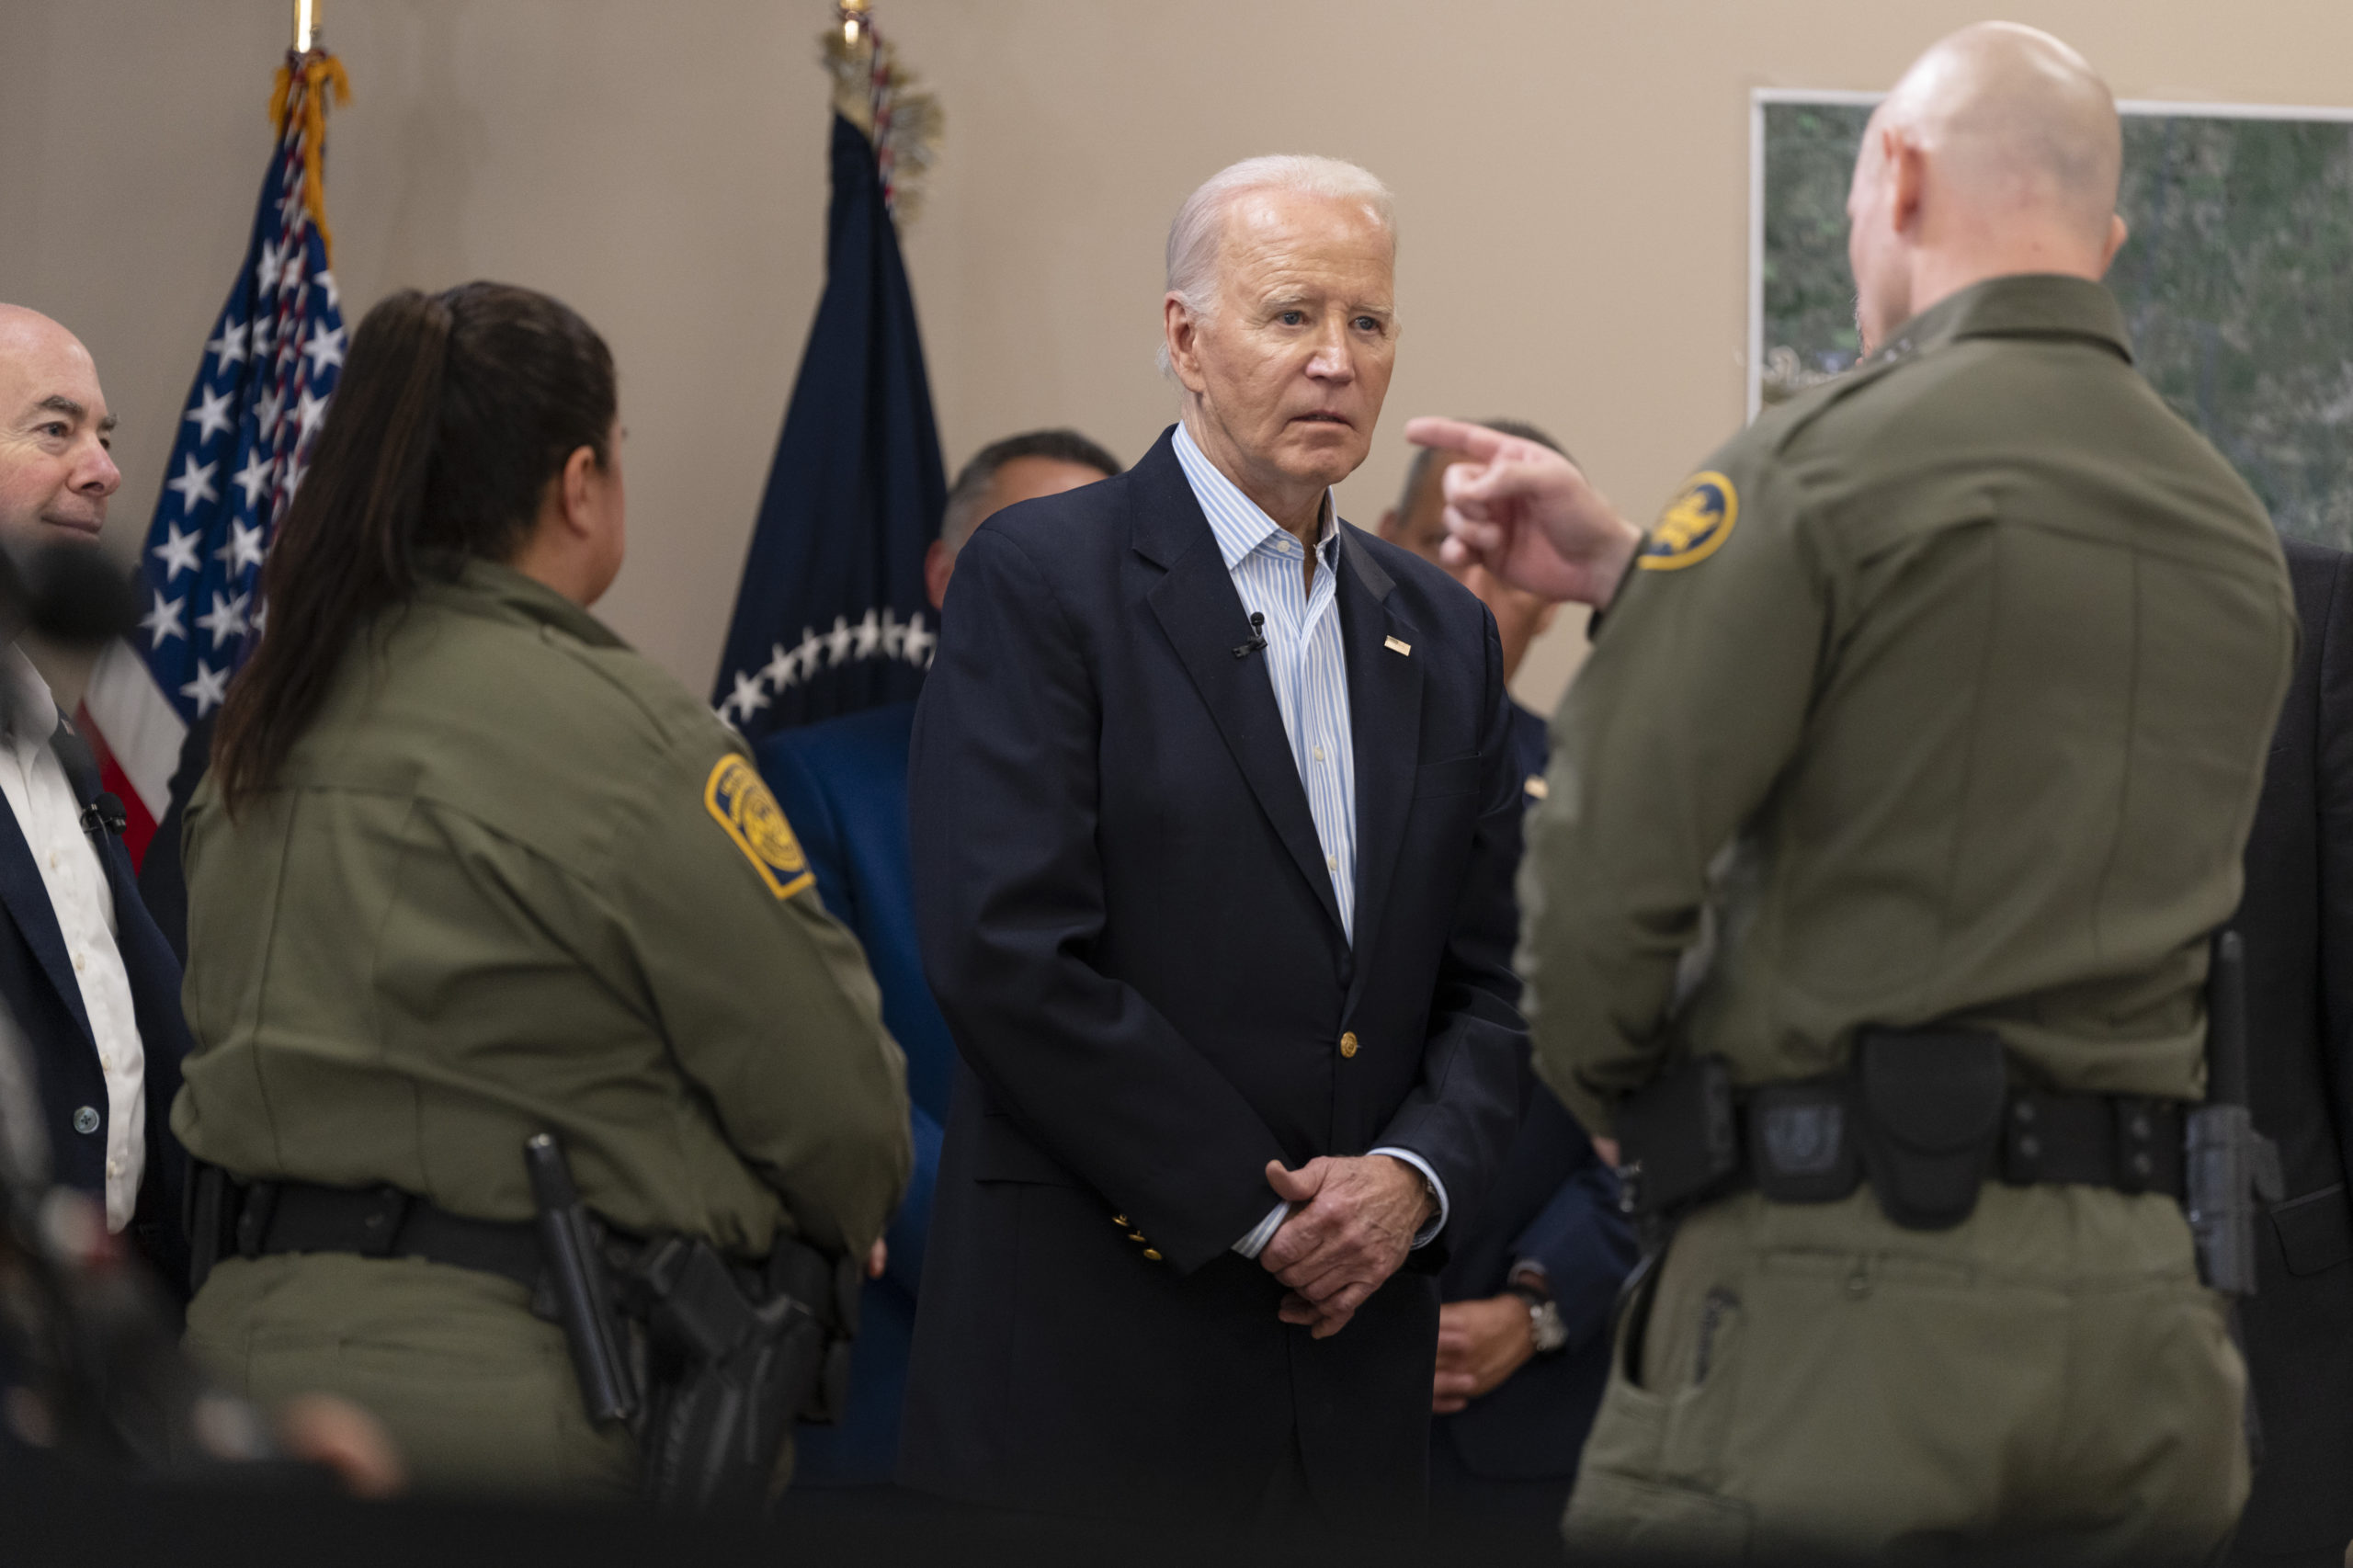 President Joe Biden listens to a U.S. Customs and Border Protection officer during a presentation about immigration and border security at the Brownsville Station on February 29, 2024 in Olmito, Texas. The President visited the border near Brownsville on the same day as a dueling trip made by former President Donald Trump to neighboring Eagle Pass, Texas. (Photo by Cheney Orr/Getty Images)